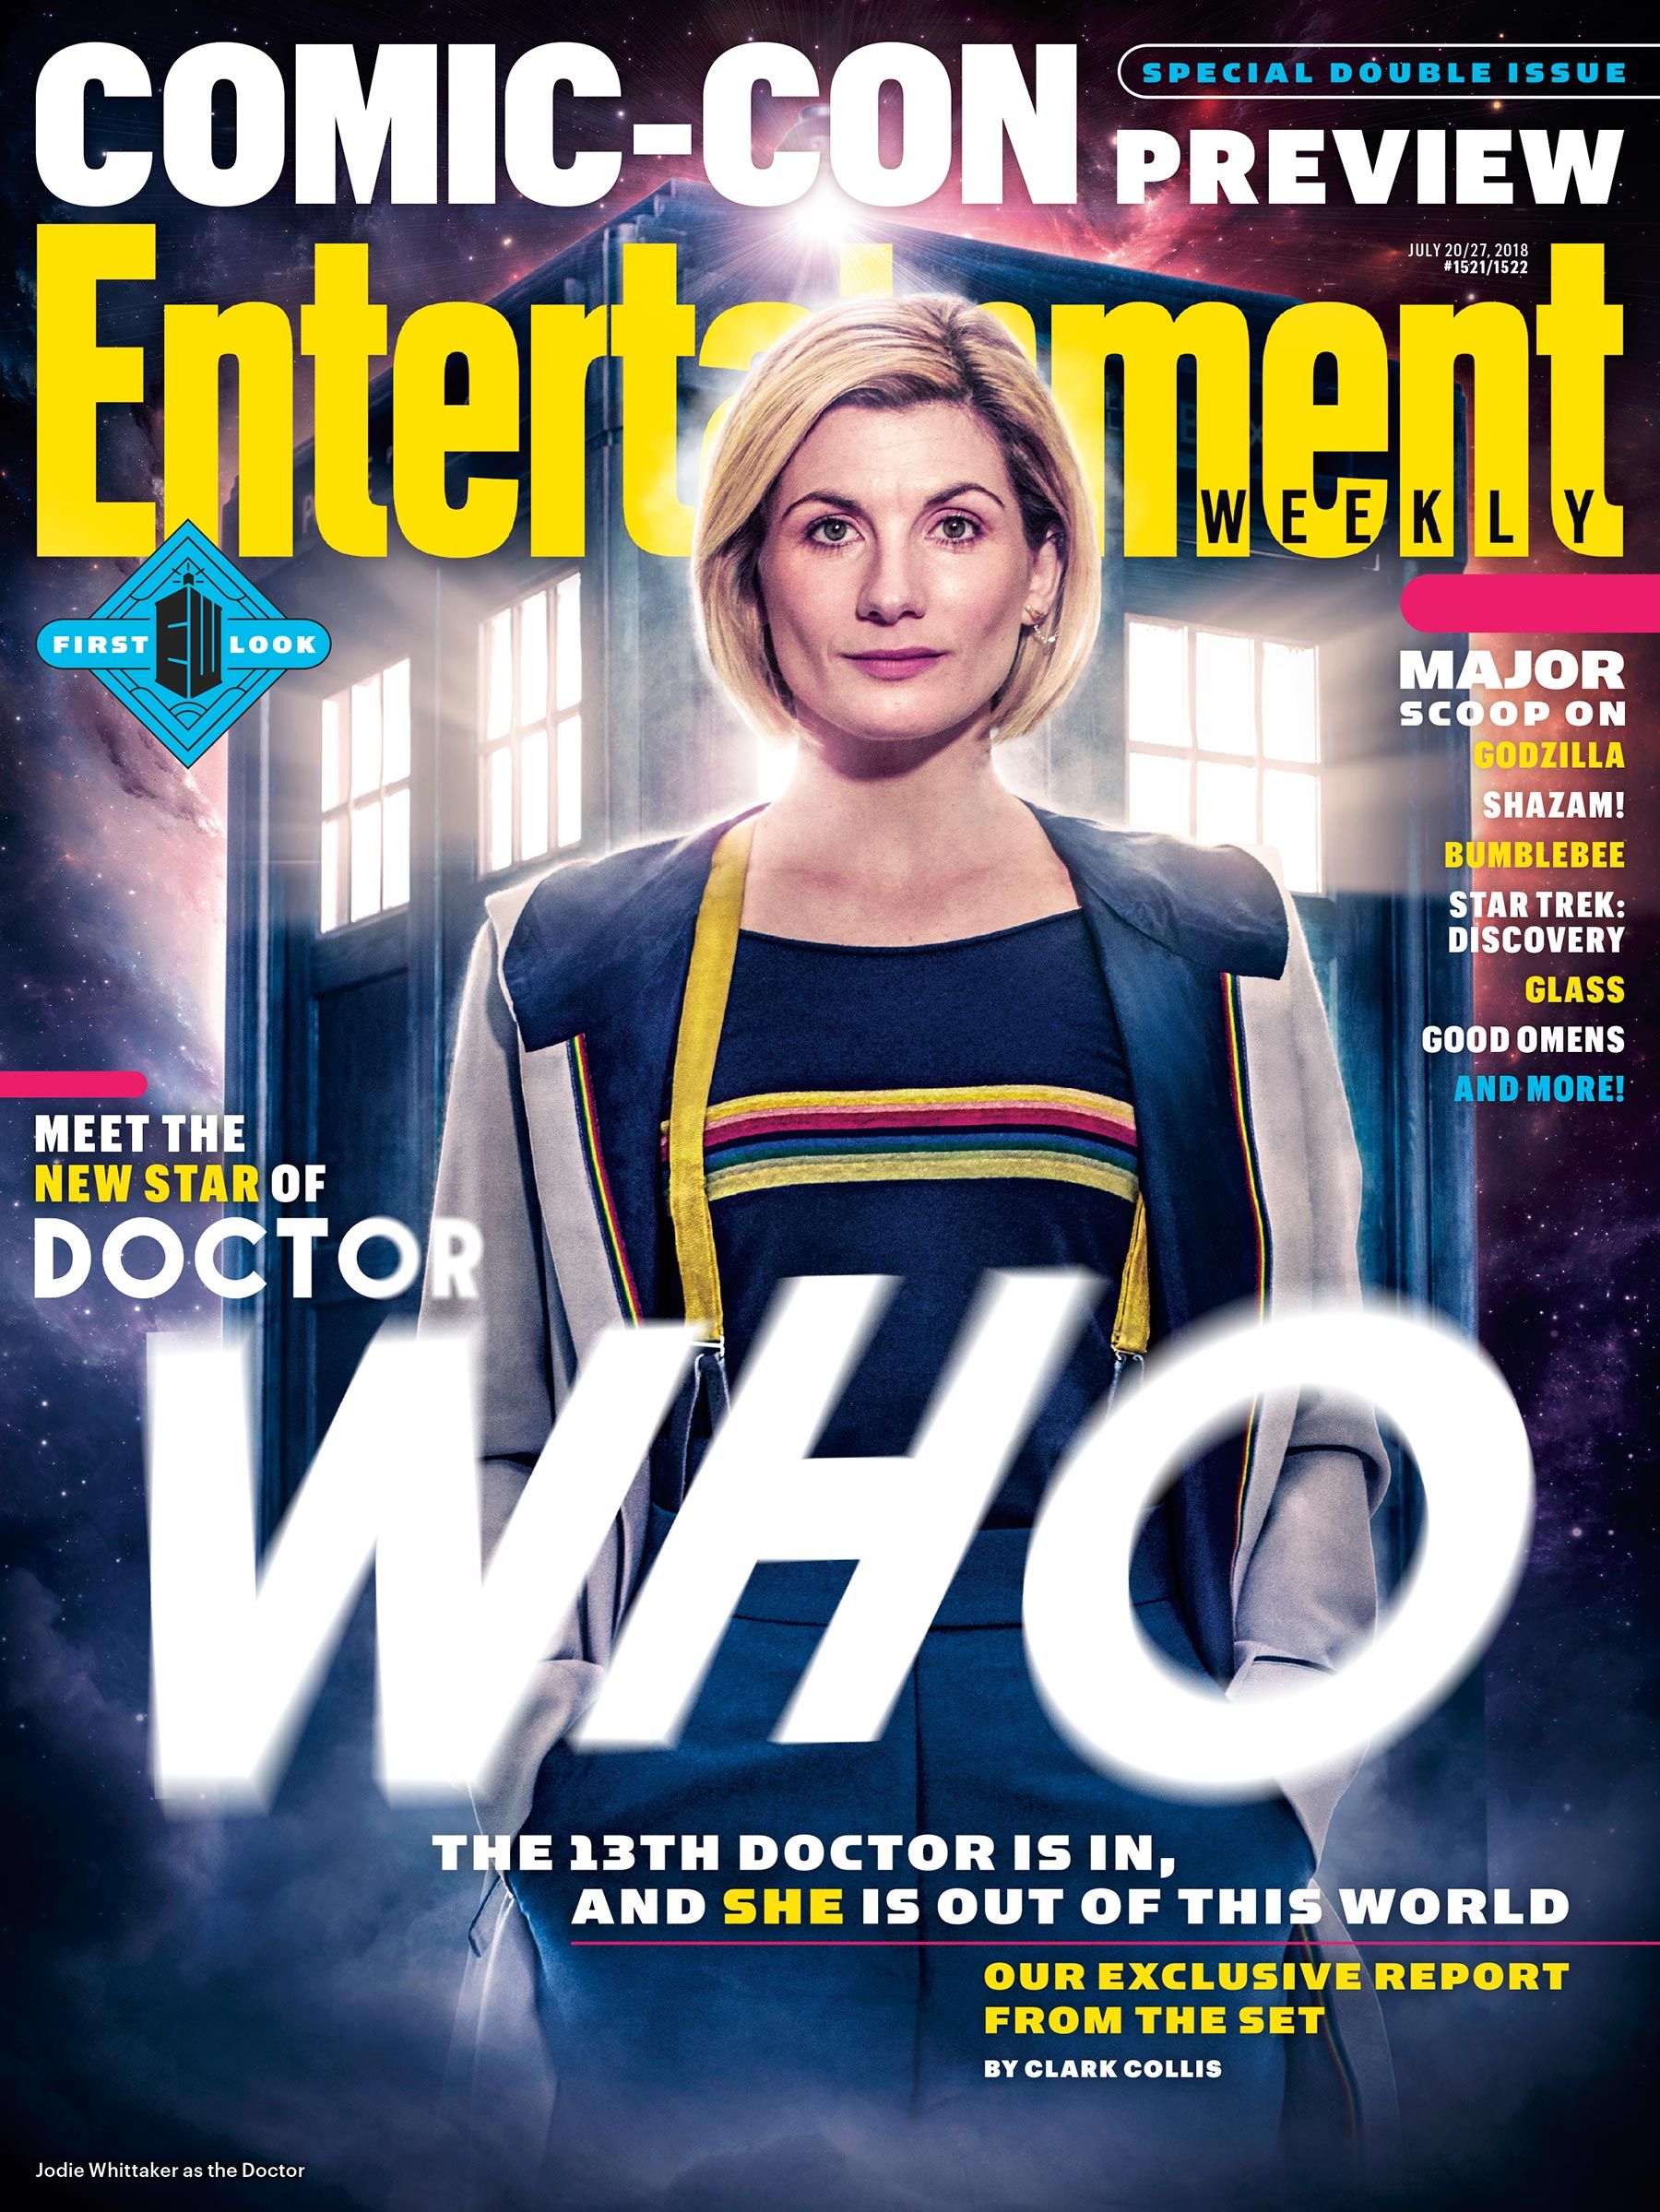 Doctor Who’s Jodie Whittaker Is Featured On EW’s Comic-Con Cover